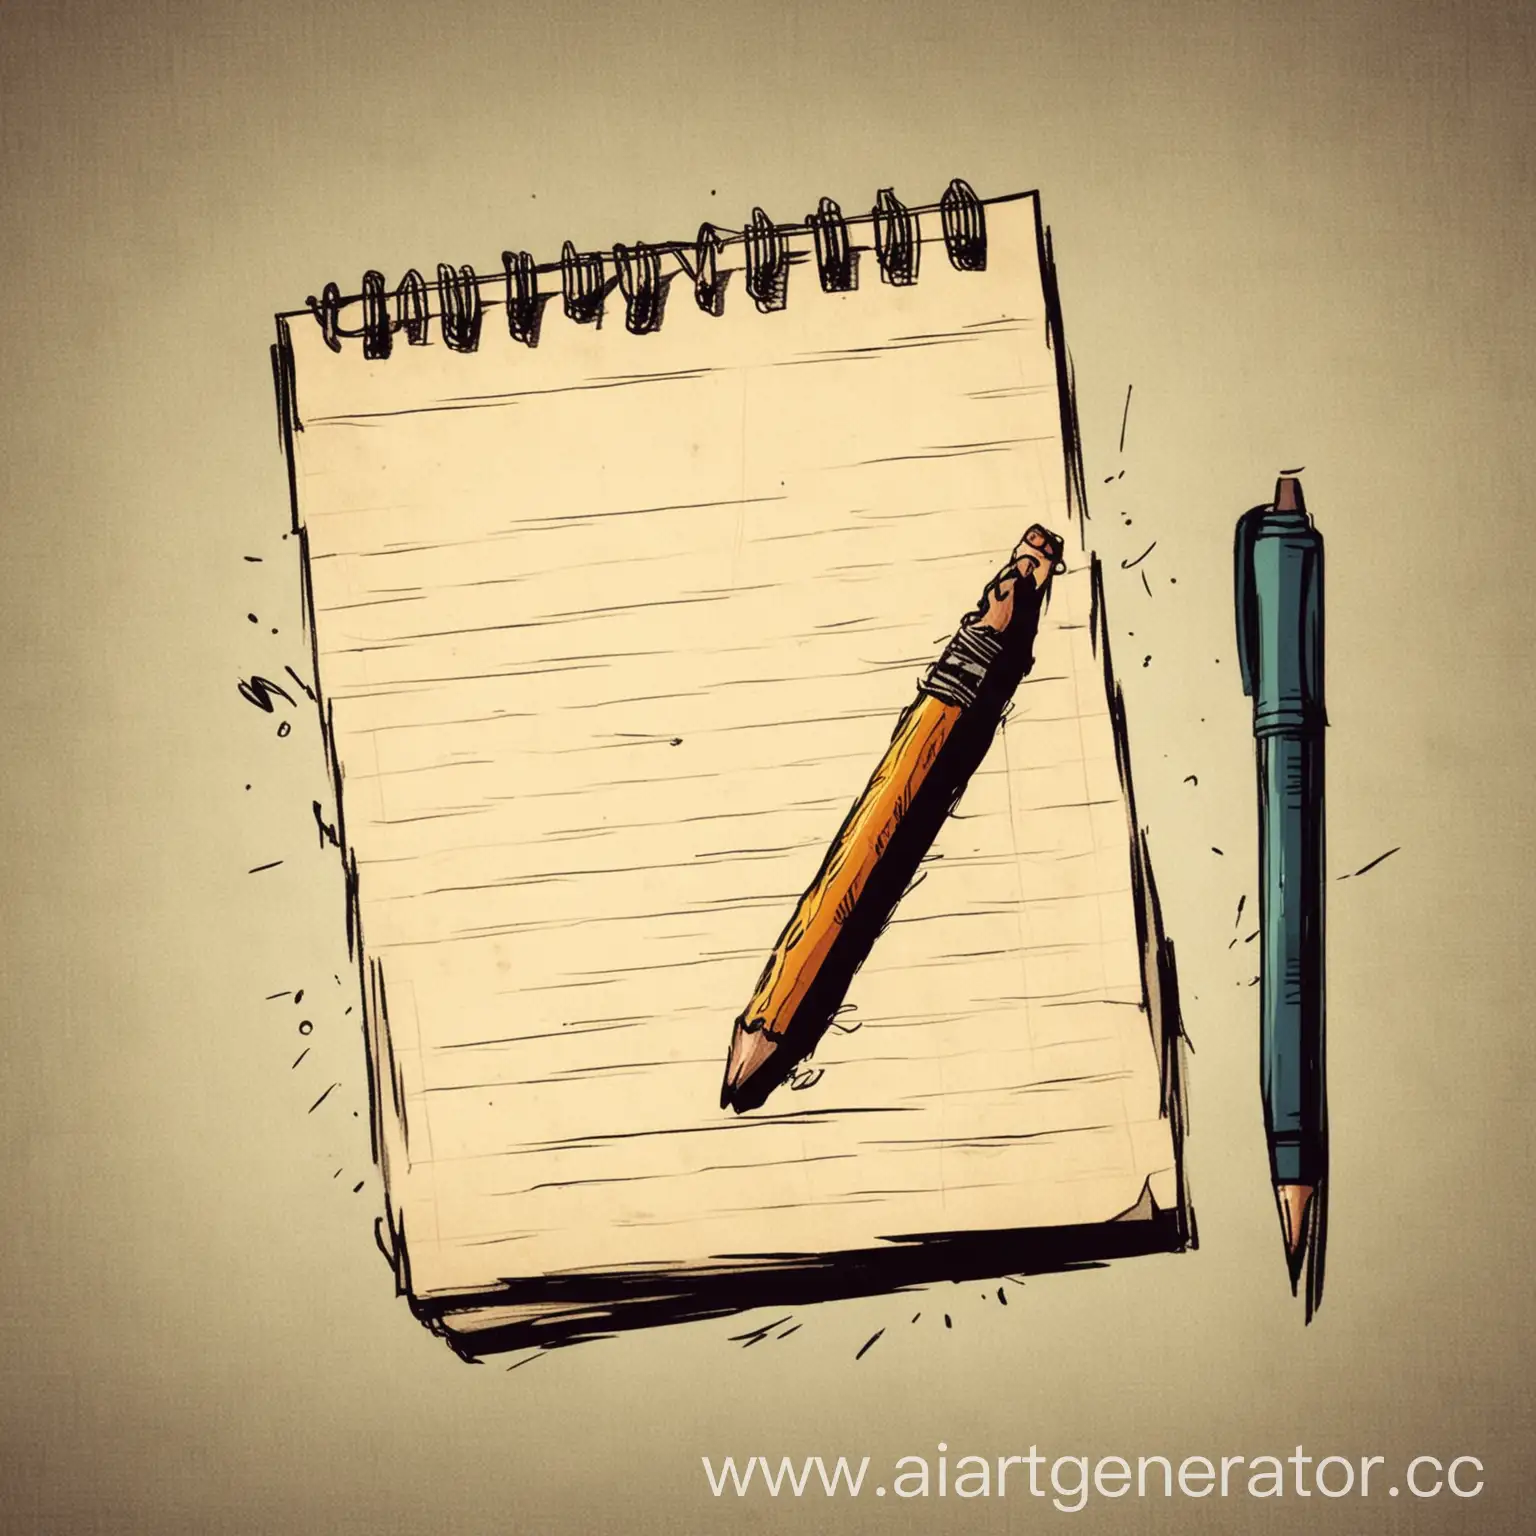 a comic book-style picture showing a notepad and a squeaking pencil (without a hand)